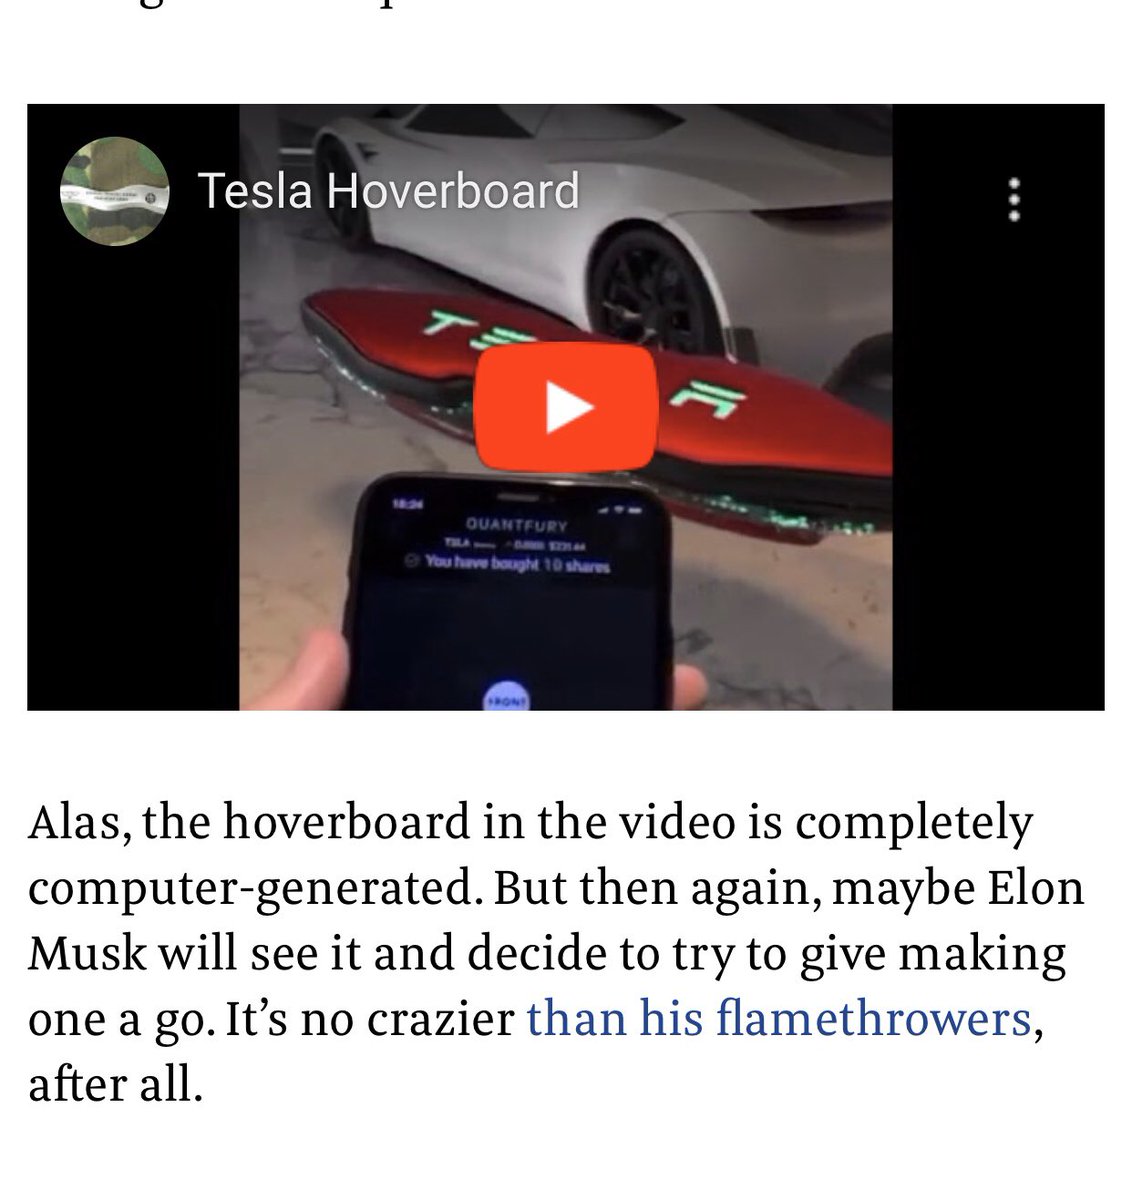 Larry Twitter: "#SaturdayThoughts | #SaturdayMotivation 👍Tesla's hoverboard concept! https://t.co/4oTS9mfO4x" / Twitter